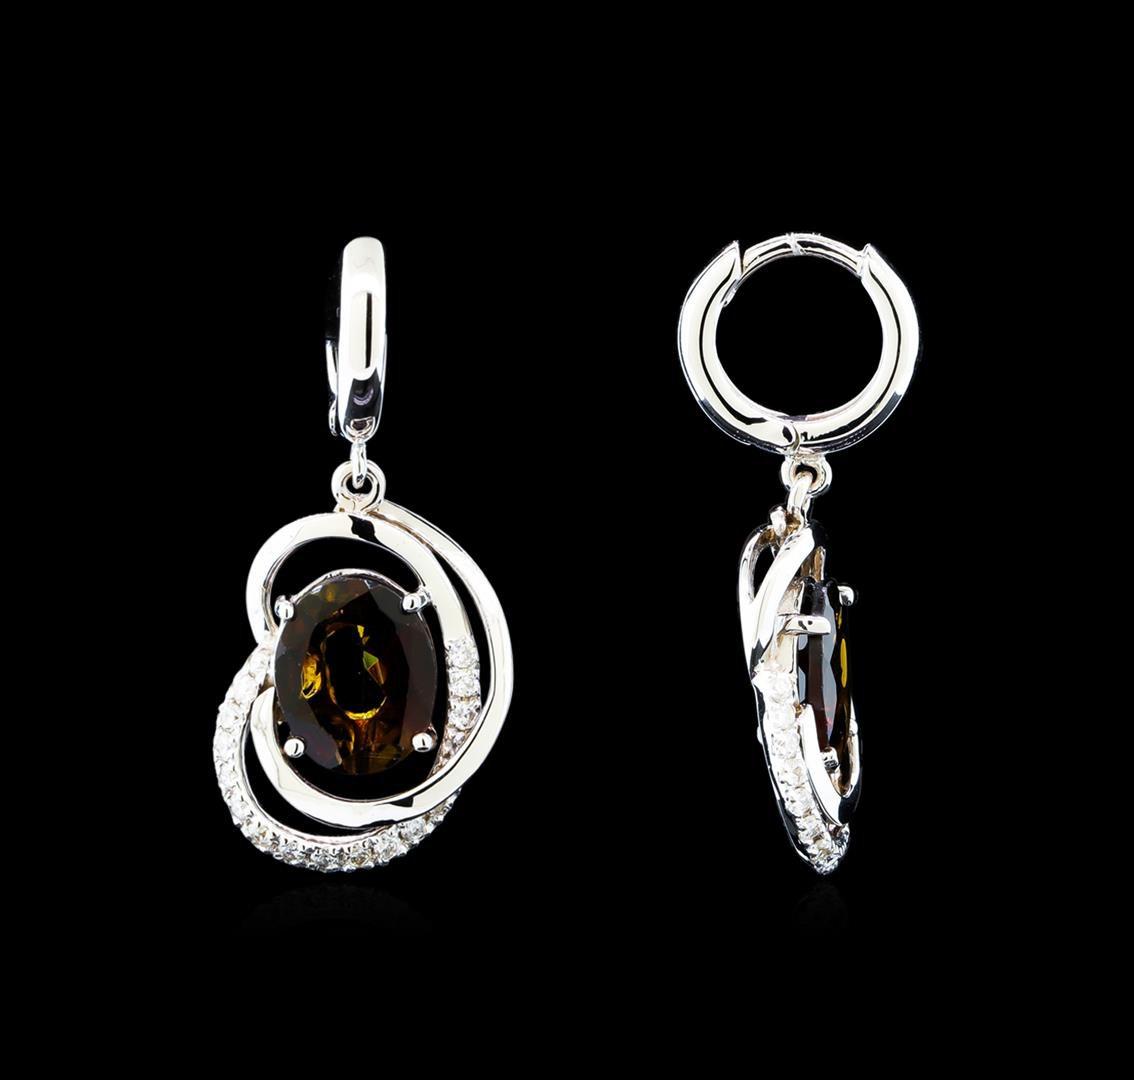 4.15 ctw Tourmaline and Diamond Earrings - 14KT White Gold